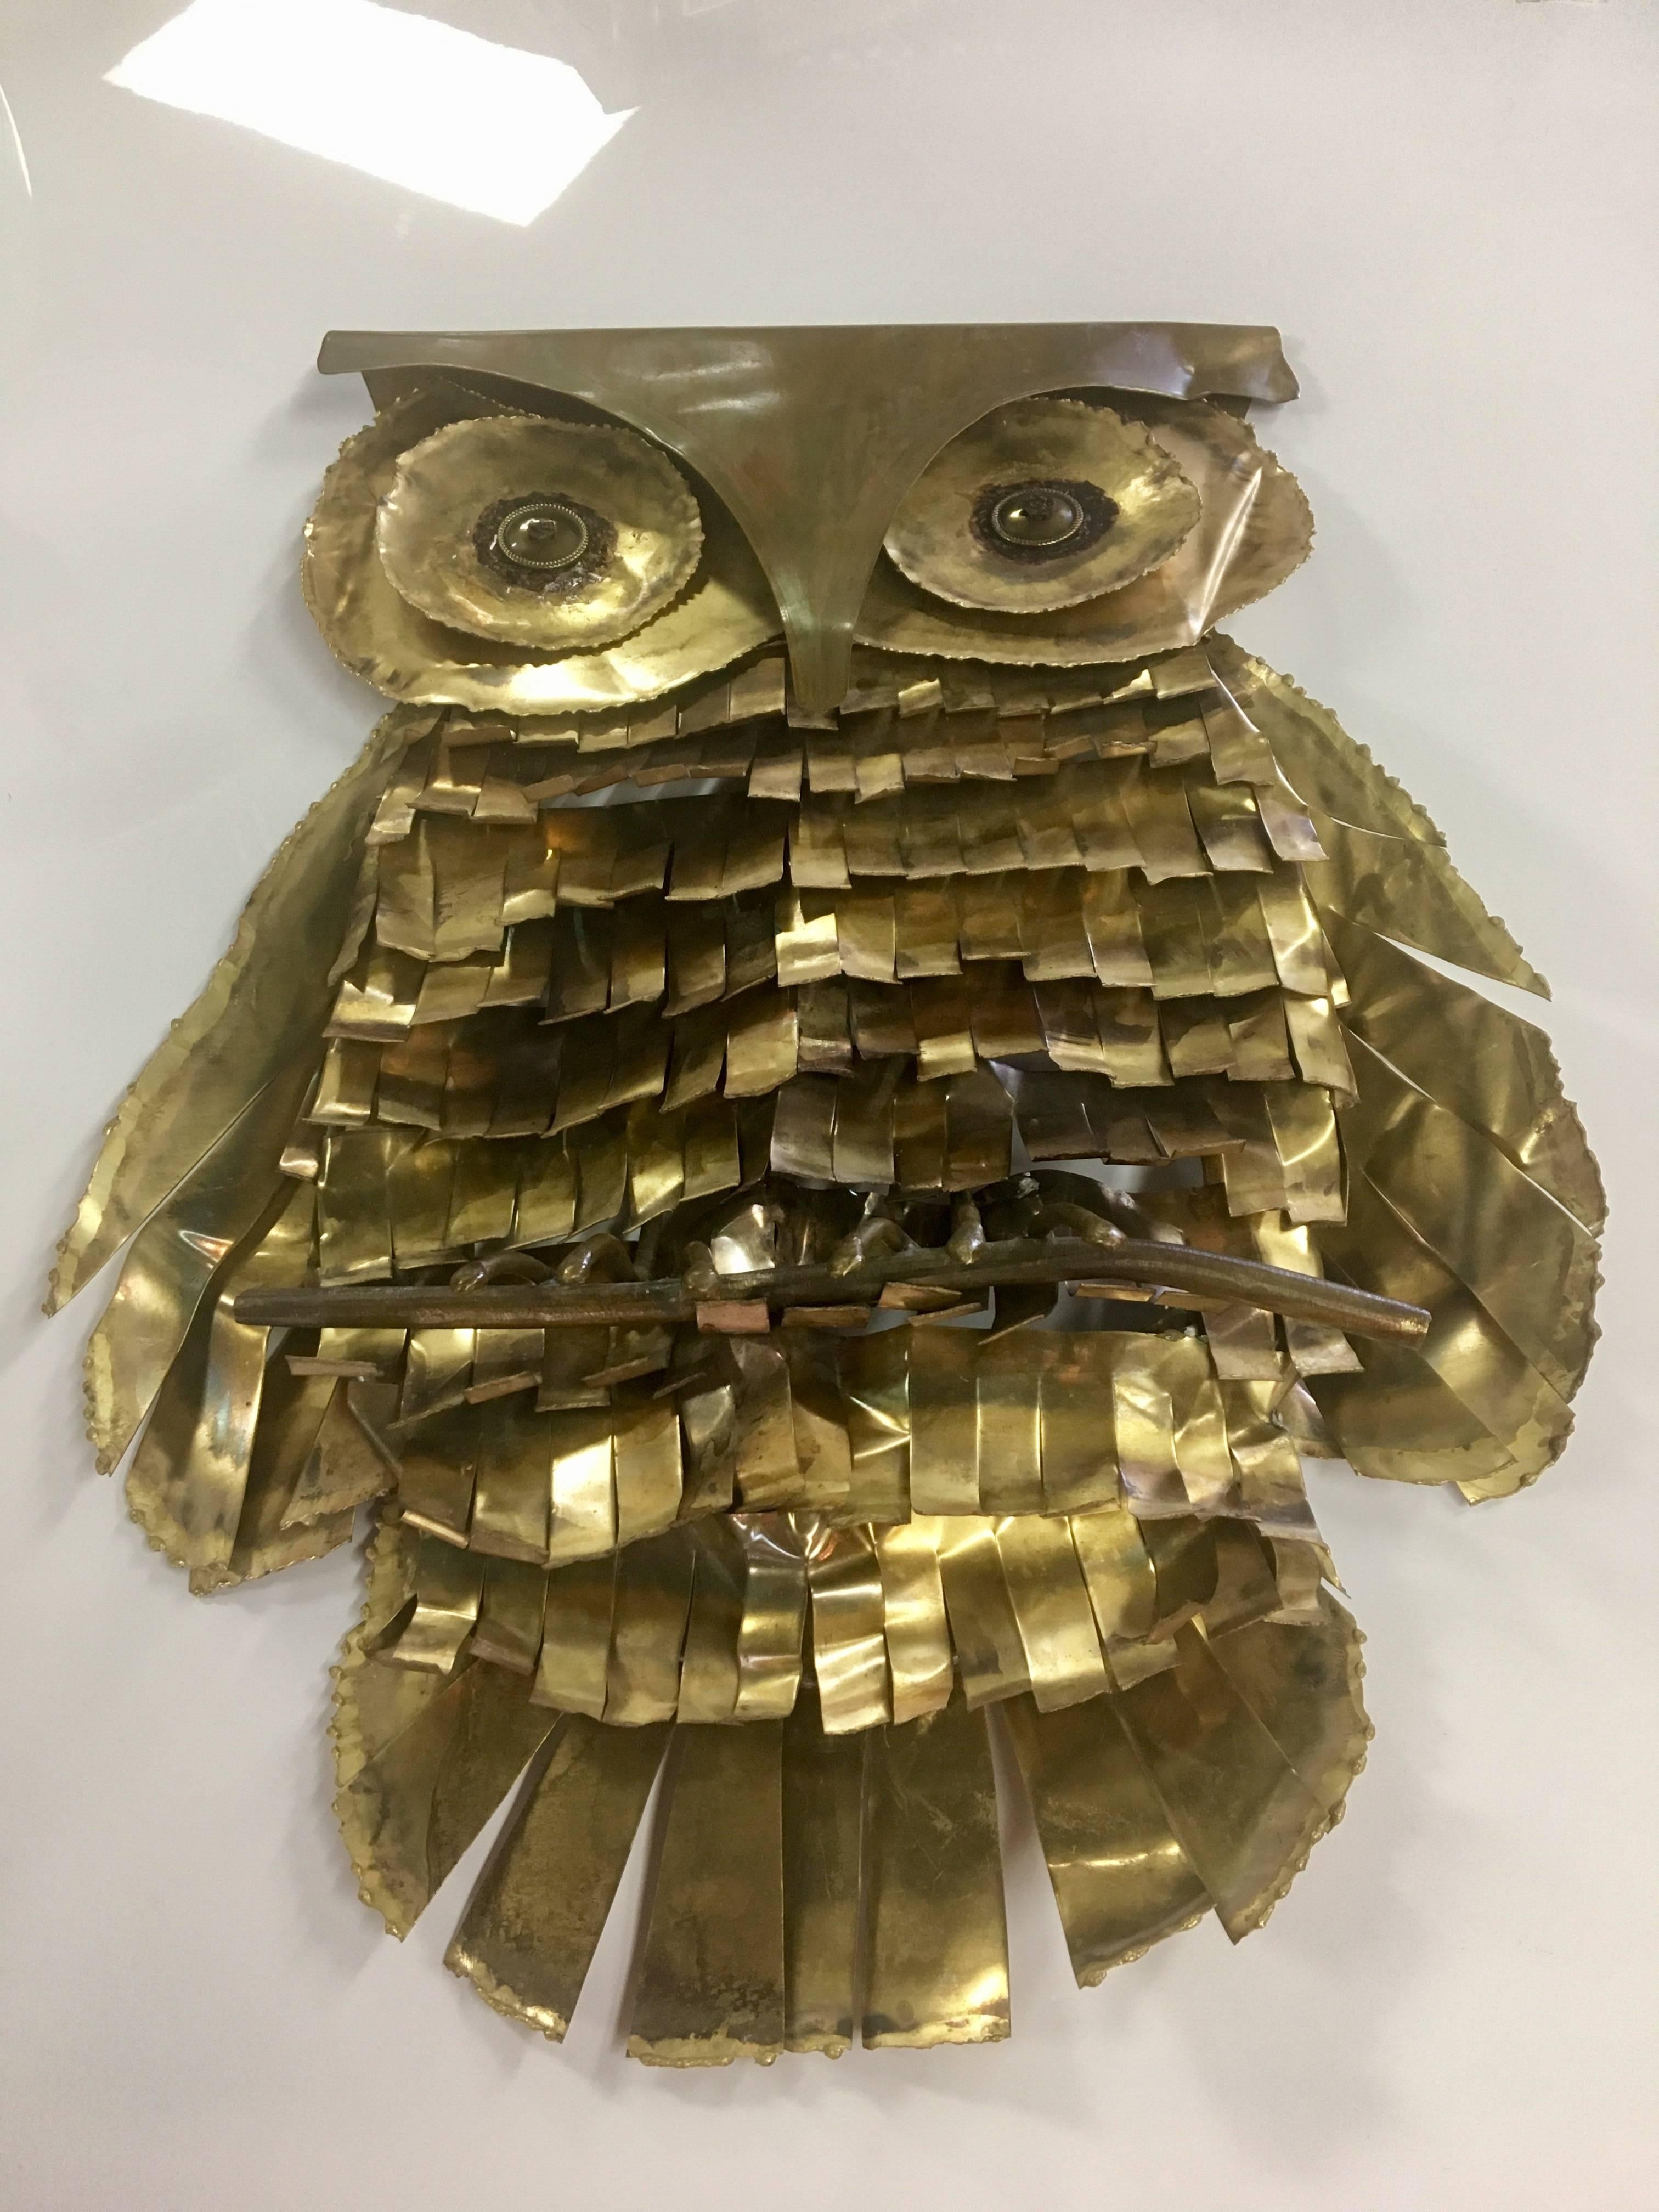 "Good luck" handmade brass owl sculpture in the style of C. Jere, circa 1970s. Very unique; nice conversation piece!